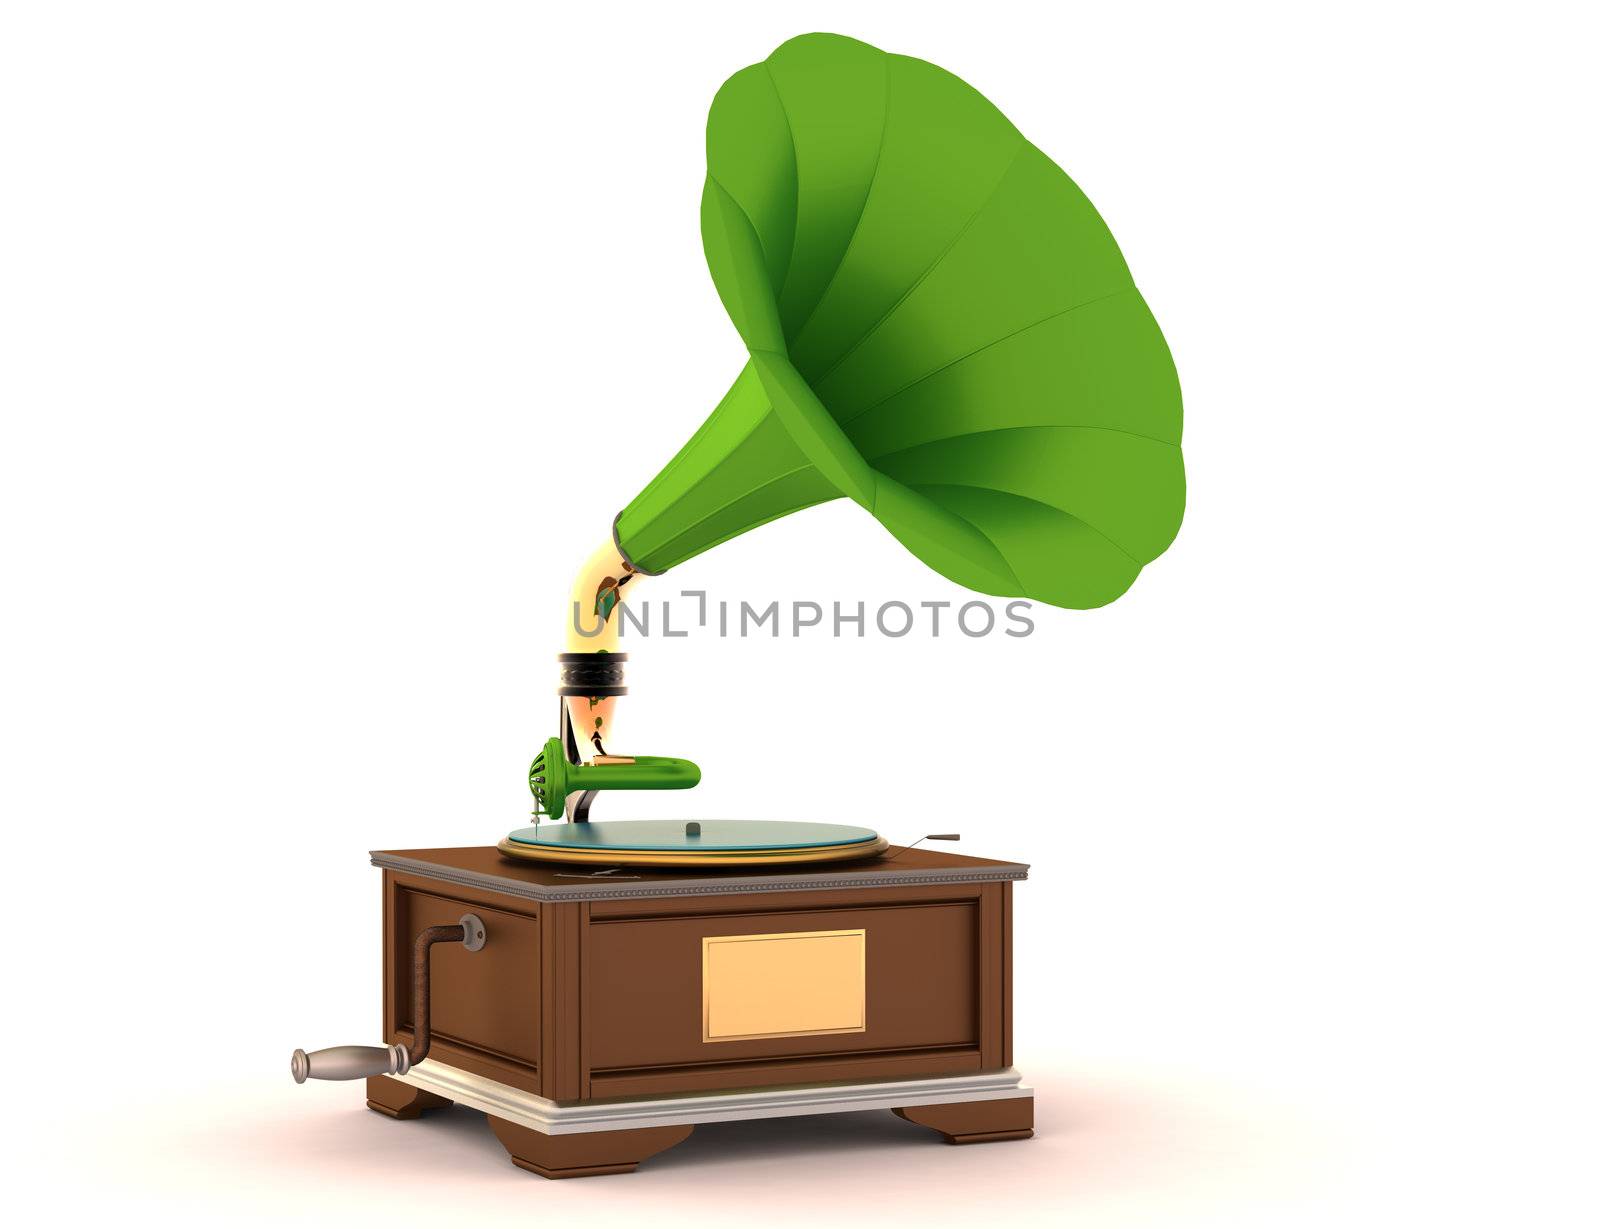 Vintage gramophone isolated by andromeda13